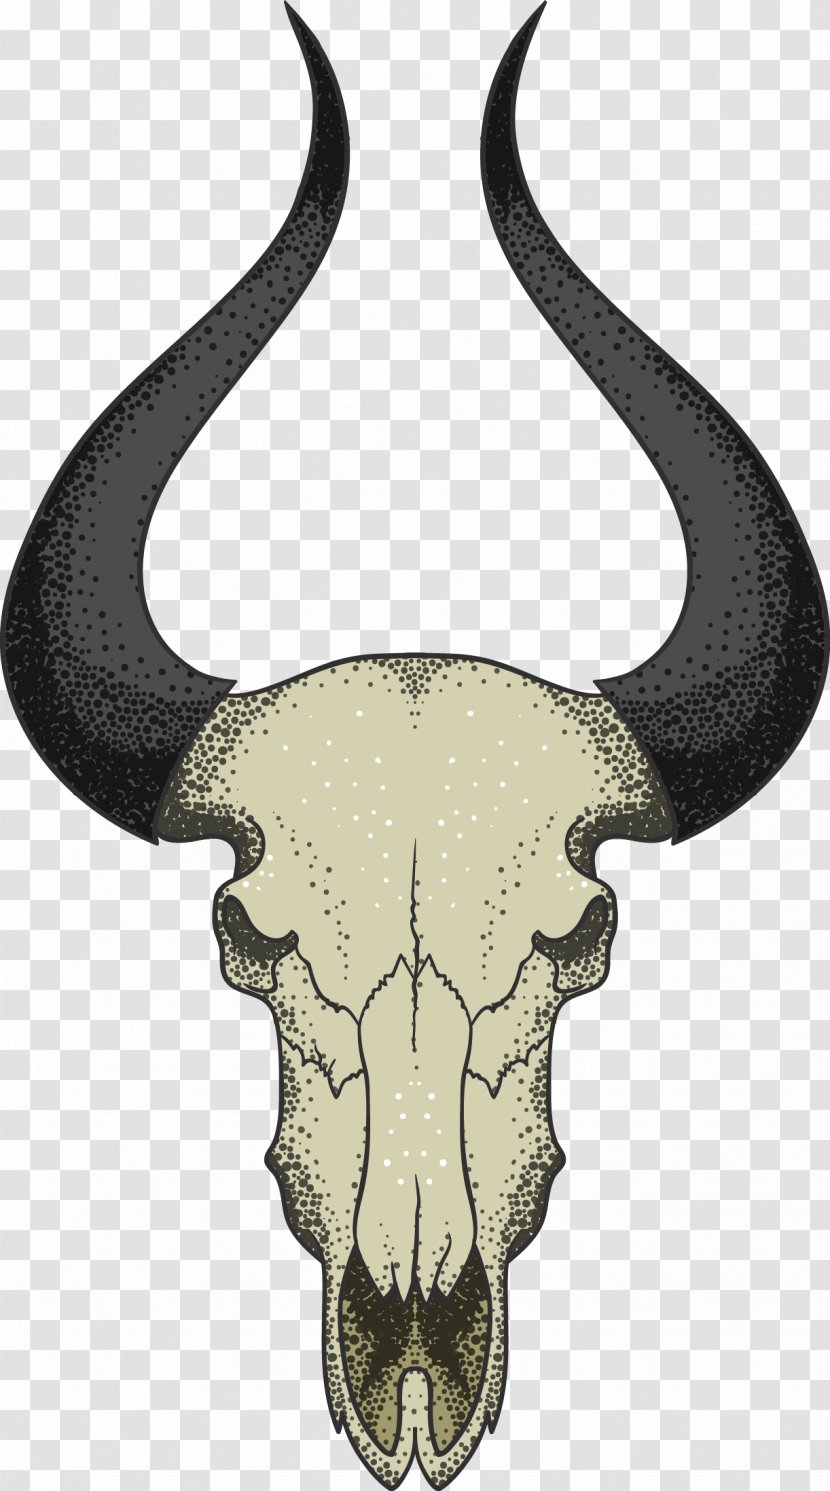 Cattle Sheep Euclidean Vector - Jaw - Hand-painted Sheep's Head Transparent PNG